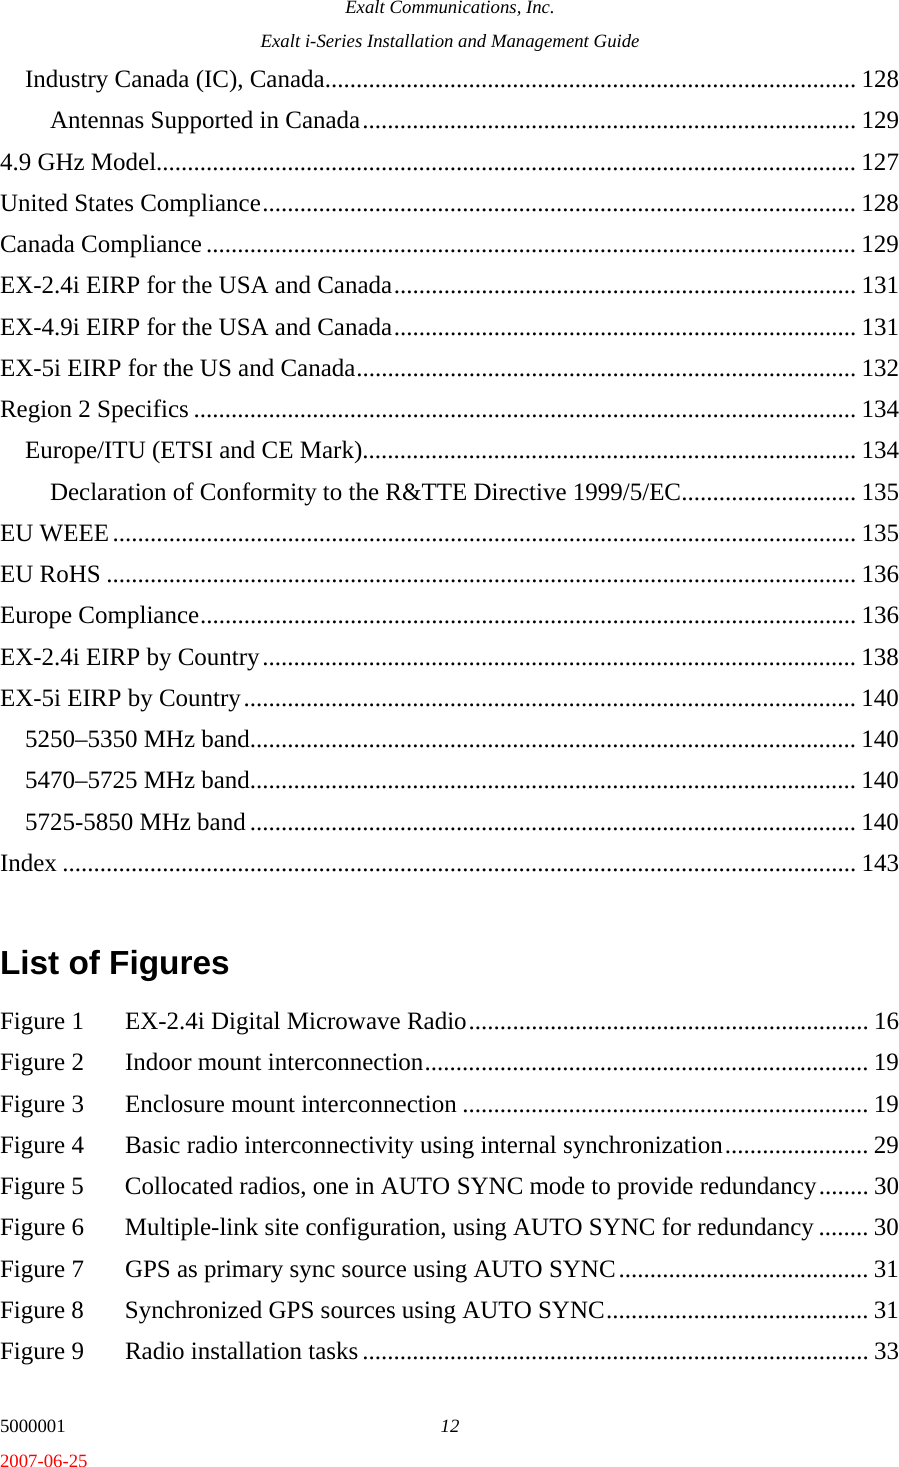 Exalt Communications, Inc. Exalt i-Series Installation and Management Guide 5000001  12 2007-06-25 Industry Canada (IC), Canada..................................................................................... 128 Antennas Supported in Canada............................................................................... 129 4.9 GHz Model................................................................................................................ 127 United States Compliance............................................................................................... 128 Canada Compliance ........................................................................................................ 129 EX-2.4i EIRP for the USA and Canada.......................................................................... 131 EX-4.9i EIRP for the USA and Canada.......................................................................... 131 EX-5i EIRP for the US and Canada................................................................................ 132 Region 2 Specifics .......................................................................................................... 134 Europe/ITU (ETSI and CE Mark)............................................................................... 134 Declaration of Conformity to the R&amp;TTE Directive 1999/5/EC............................ 135 EU WEEE....................................................................................................................... 135 EU RoHS ........................................................................................................................ 136 Europe Compliance......................................................................................................... 136 EX-2.4i EIRP by Country............................................................................................... 138 EX-5i EIRP by Country.................................................................................................. 140 5250–5350 MHz band................................................................................................. 140 5470–5725 MHz band................................................................................................. 140 5725-5850 MHz band ................................................................................................. 140 Index ............................................................................................................................... 143  List of Figures  Figure 1  EX-2.4i Digital Microwave Radio................................................................ 16 Figure 2  Indoor mount interconnection....................................................................... 19 Figure 3  Enclosure mount interconnection ................................................................. 19 Figure 4  Basic radio interconnectivity using internal synchronization....................... 29 Figure 5  Collocated radios, one in AUTO SYNC mode to provide redundancy........ 30 Figure 6  Multiple-link site configuration, using AUTO SYNC for redundancy ........ 30 Figure 7  GPS as primary sync source using AUTO SYNC........................................ 31 Figure 8  Synchronized GPS sources using AUTO SYNC.......................................... 31 Figure 9  Radio installation tasks ................................................................................. 33 